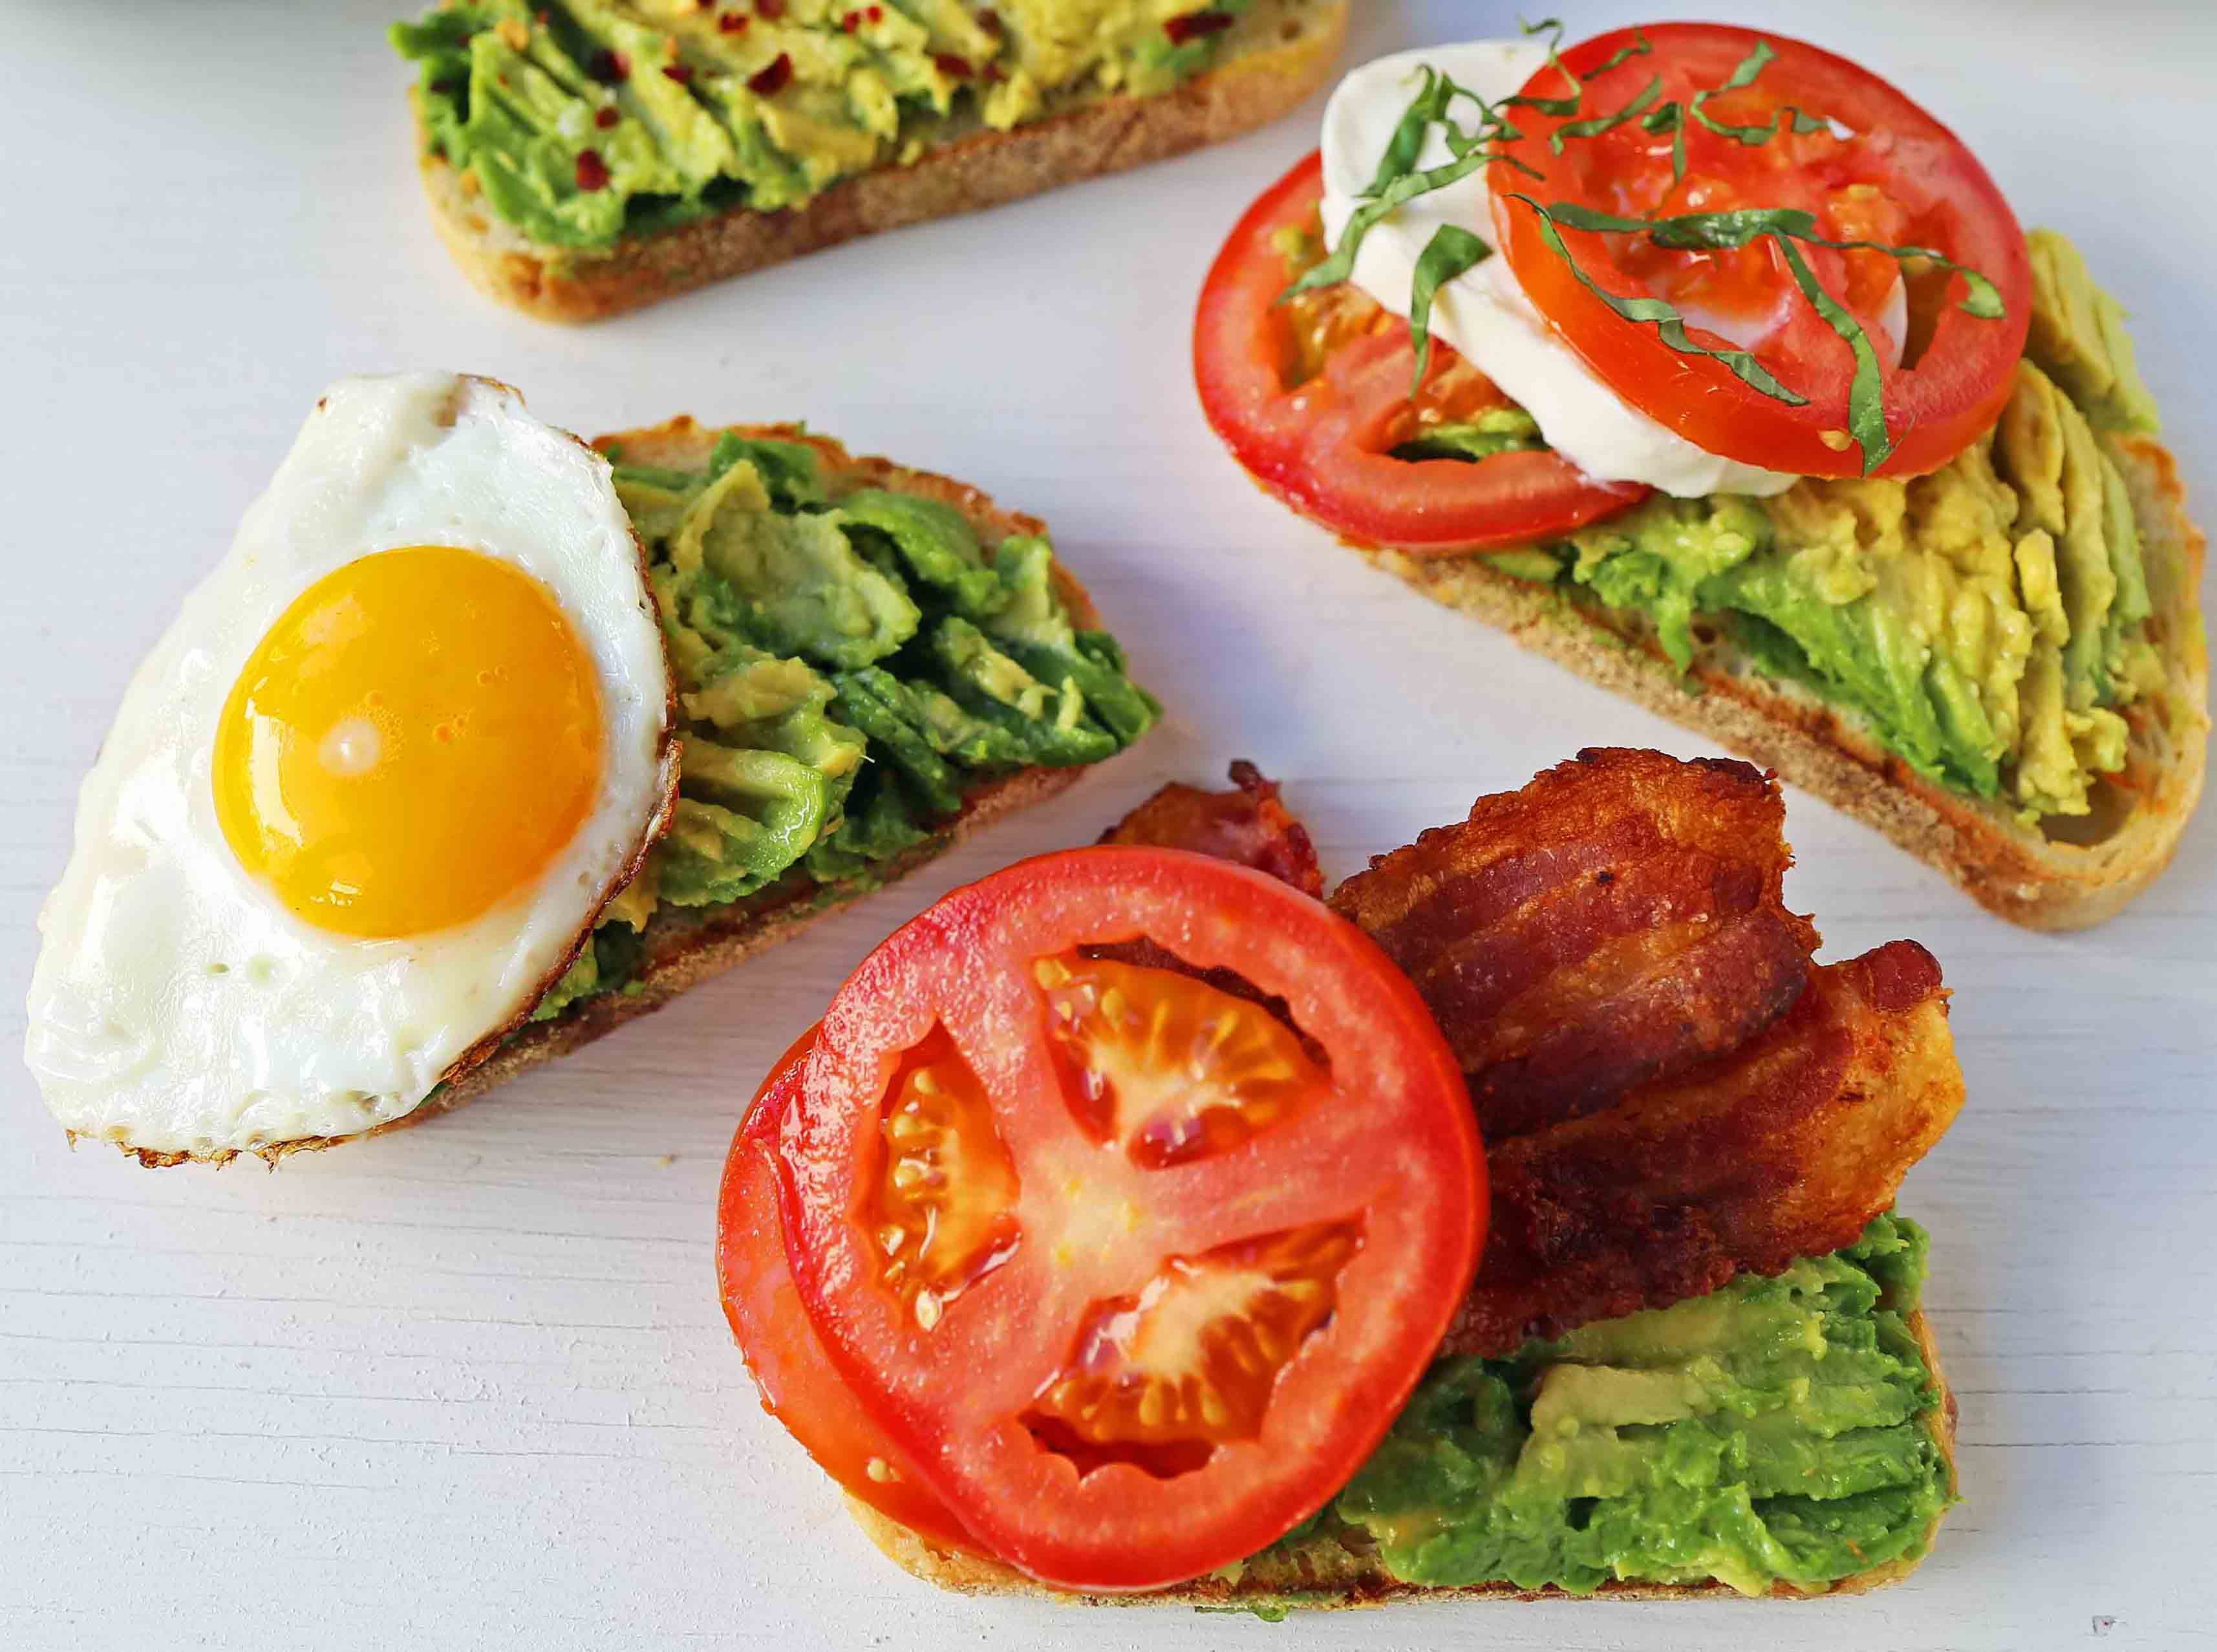 Avocado Toast -- 4 Ways. How to make perfect avocado toast. Caprese Avocado Toast, BAT Bacon Avocado Tomato Avocado Toast, Fried Egg Avocado Toast, Avocado Toast with Sea Salt and Chili Flakes. Tips and tricks for making the best avocado toast. www.modernhoney.com #avocadotoast #avocados #avocado